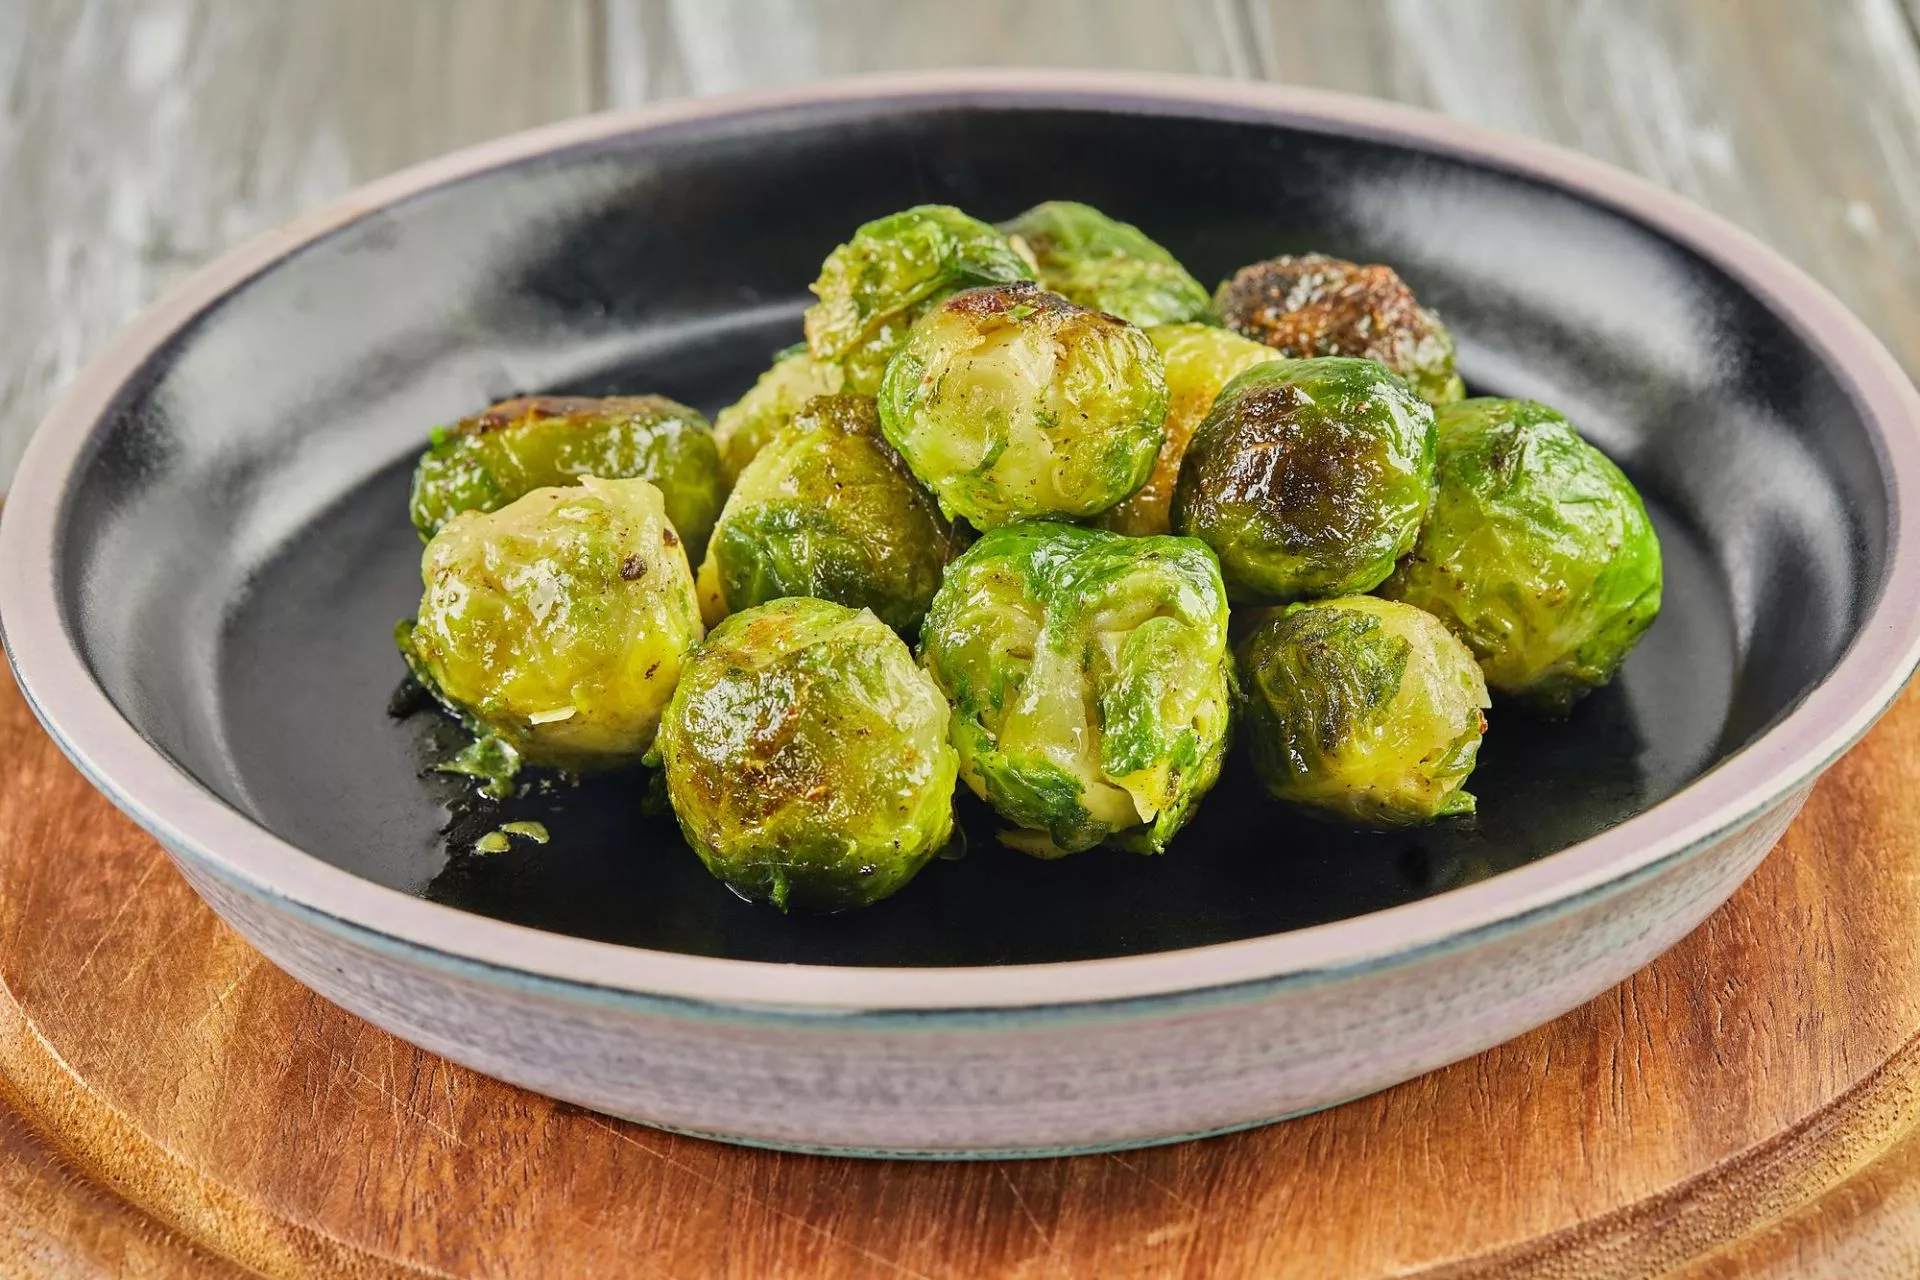 How to Cook Brussel Sprouts on a Stove?